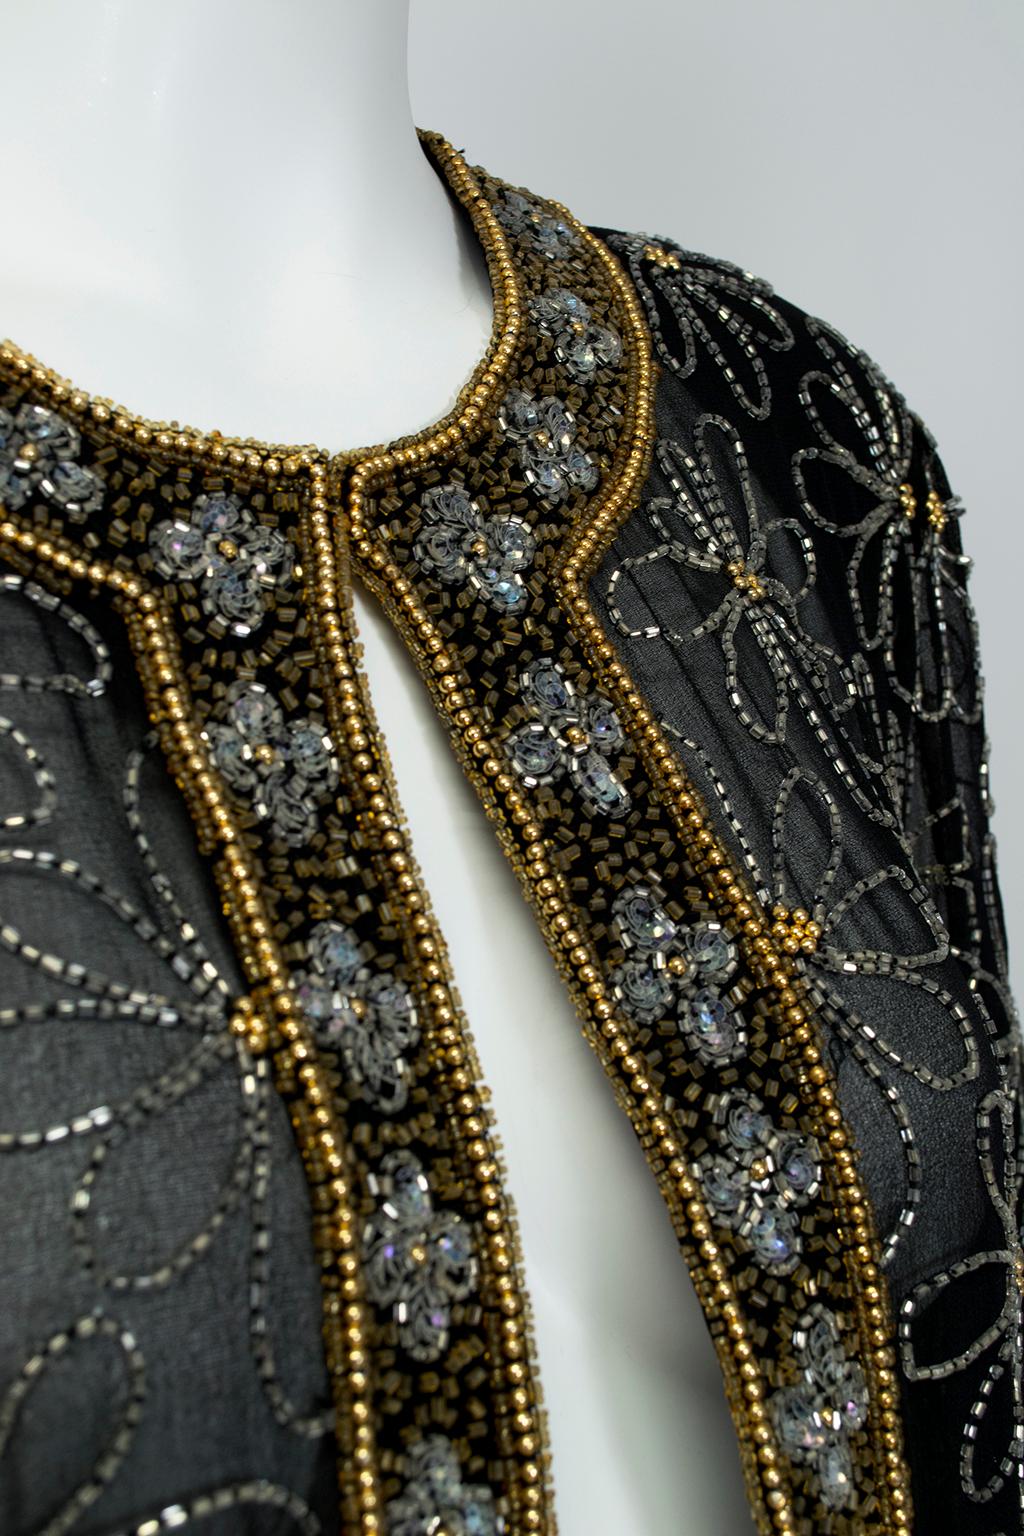 Sheer Indian Black Silk and Gold Bead Kaftan Coat - M-L, 1980s In Excellent Condition For Sale In Tucson, AZ